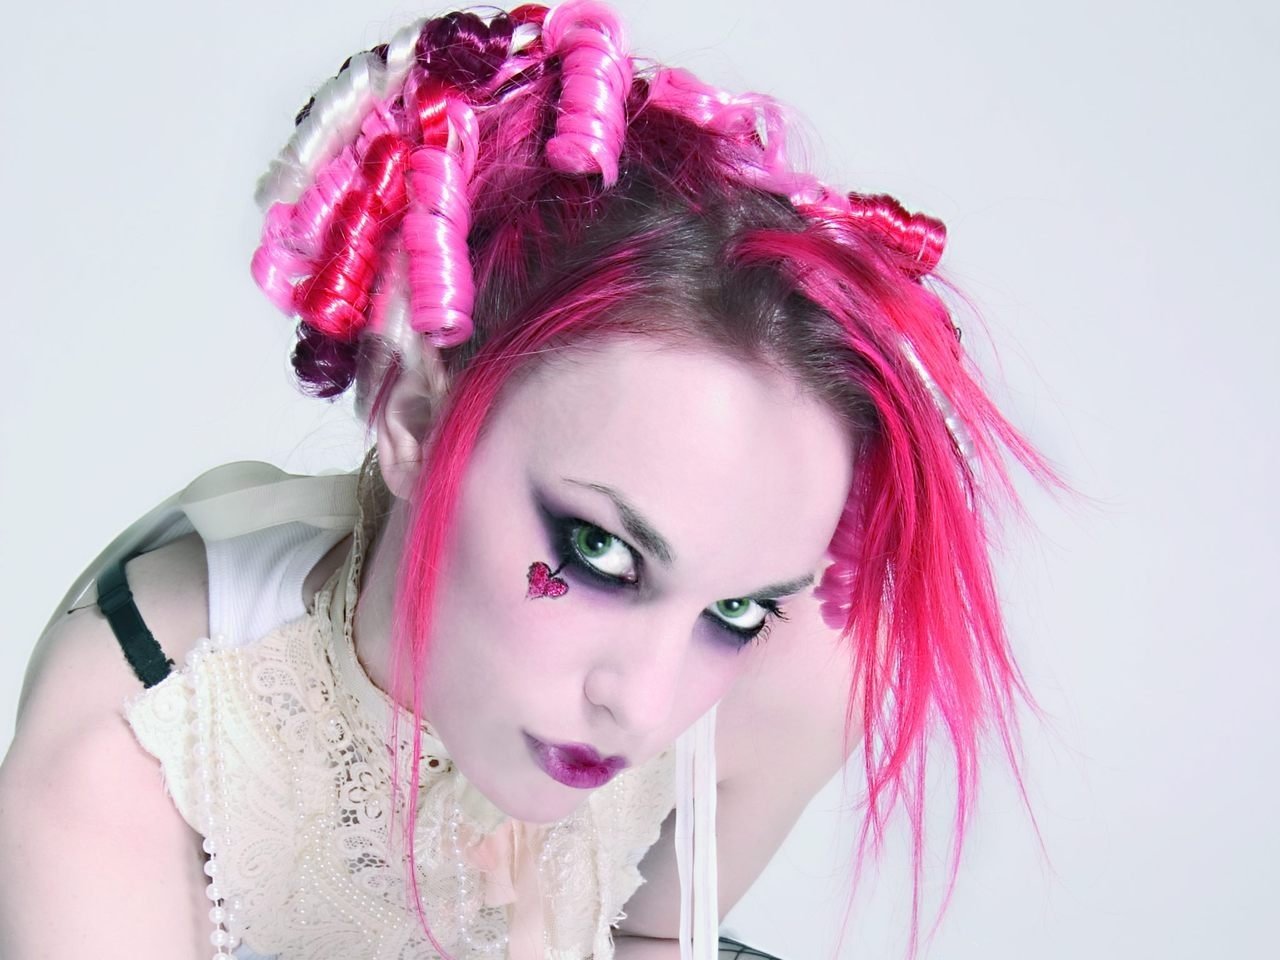 music, emilie autumn cell phone wallpapers